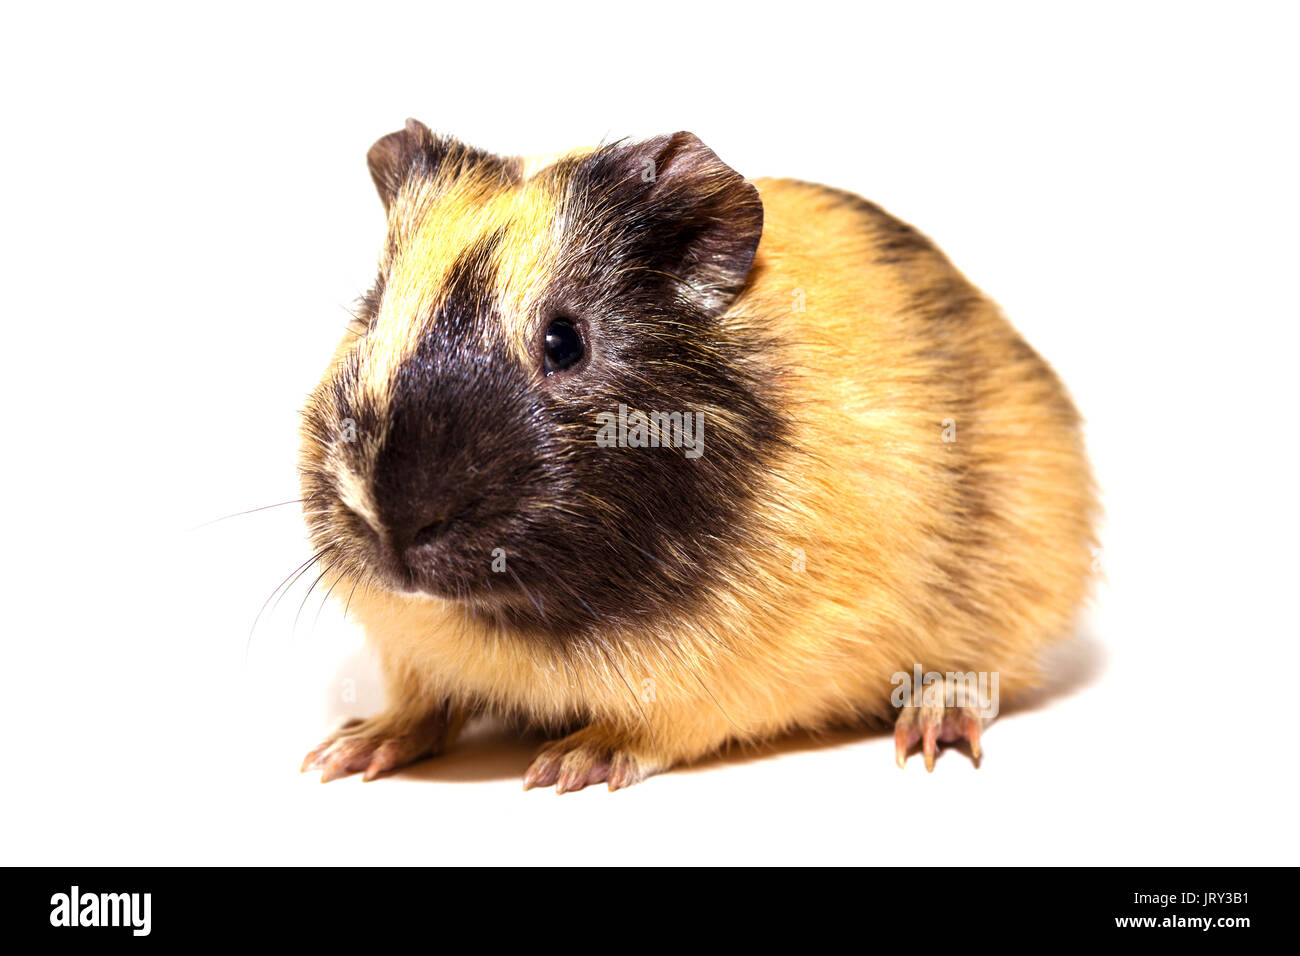 Fluffy cute rodent - guinea pig on neutral background Stock Photo